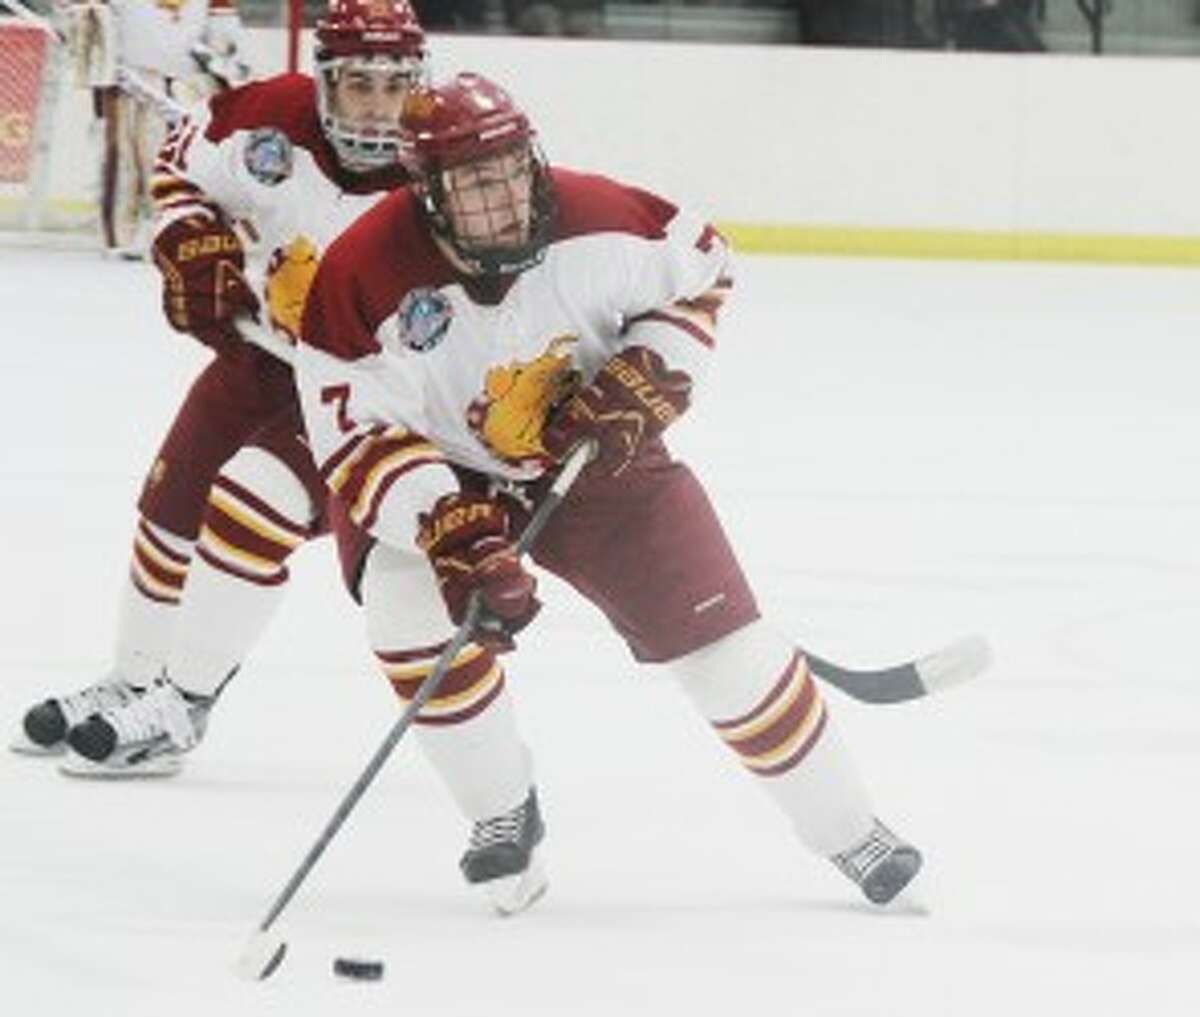 BIG WEEKEND: Ferris State defenseman Jason Binkley will have his hands full against an athletic and experienced Notre Dame offense this weekend. (Pioneer file photo)